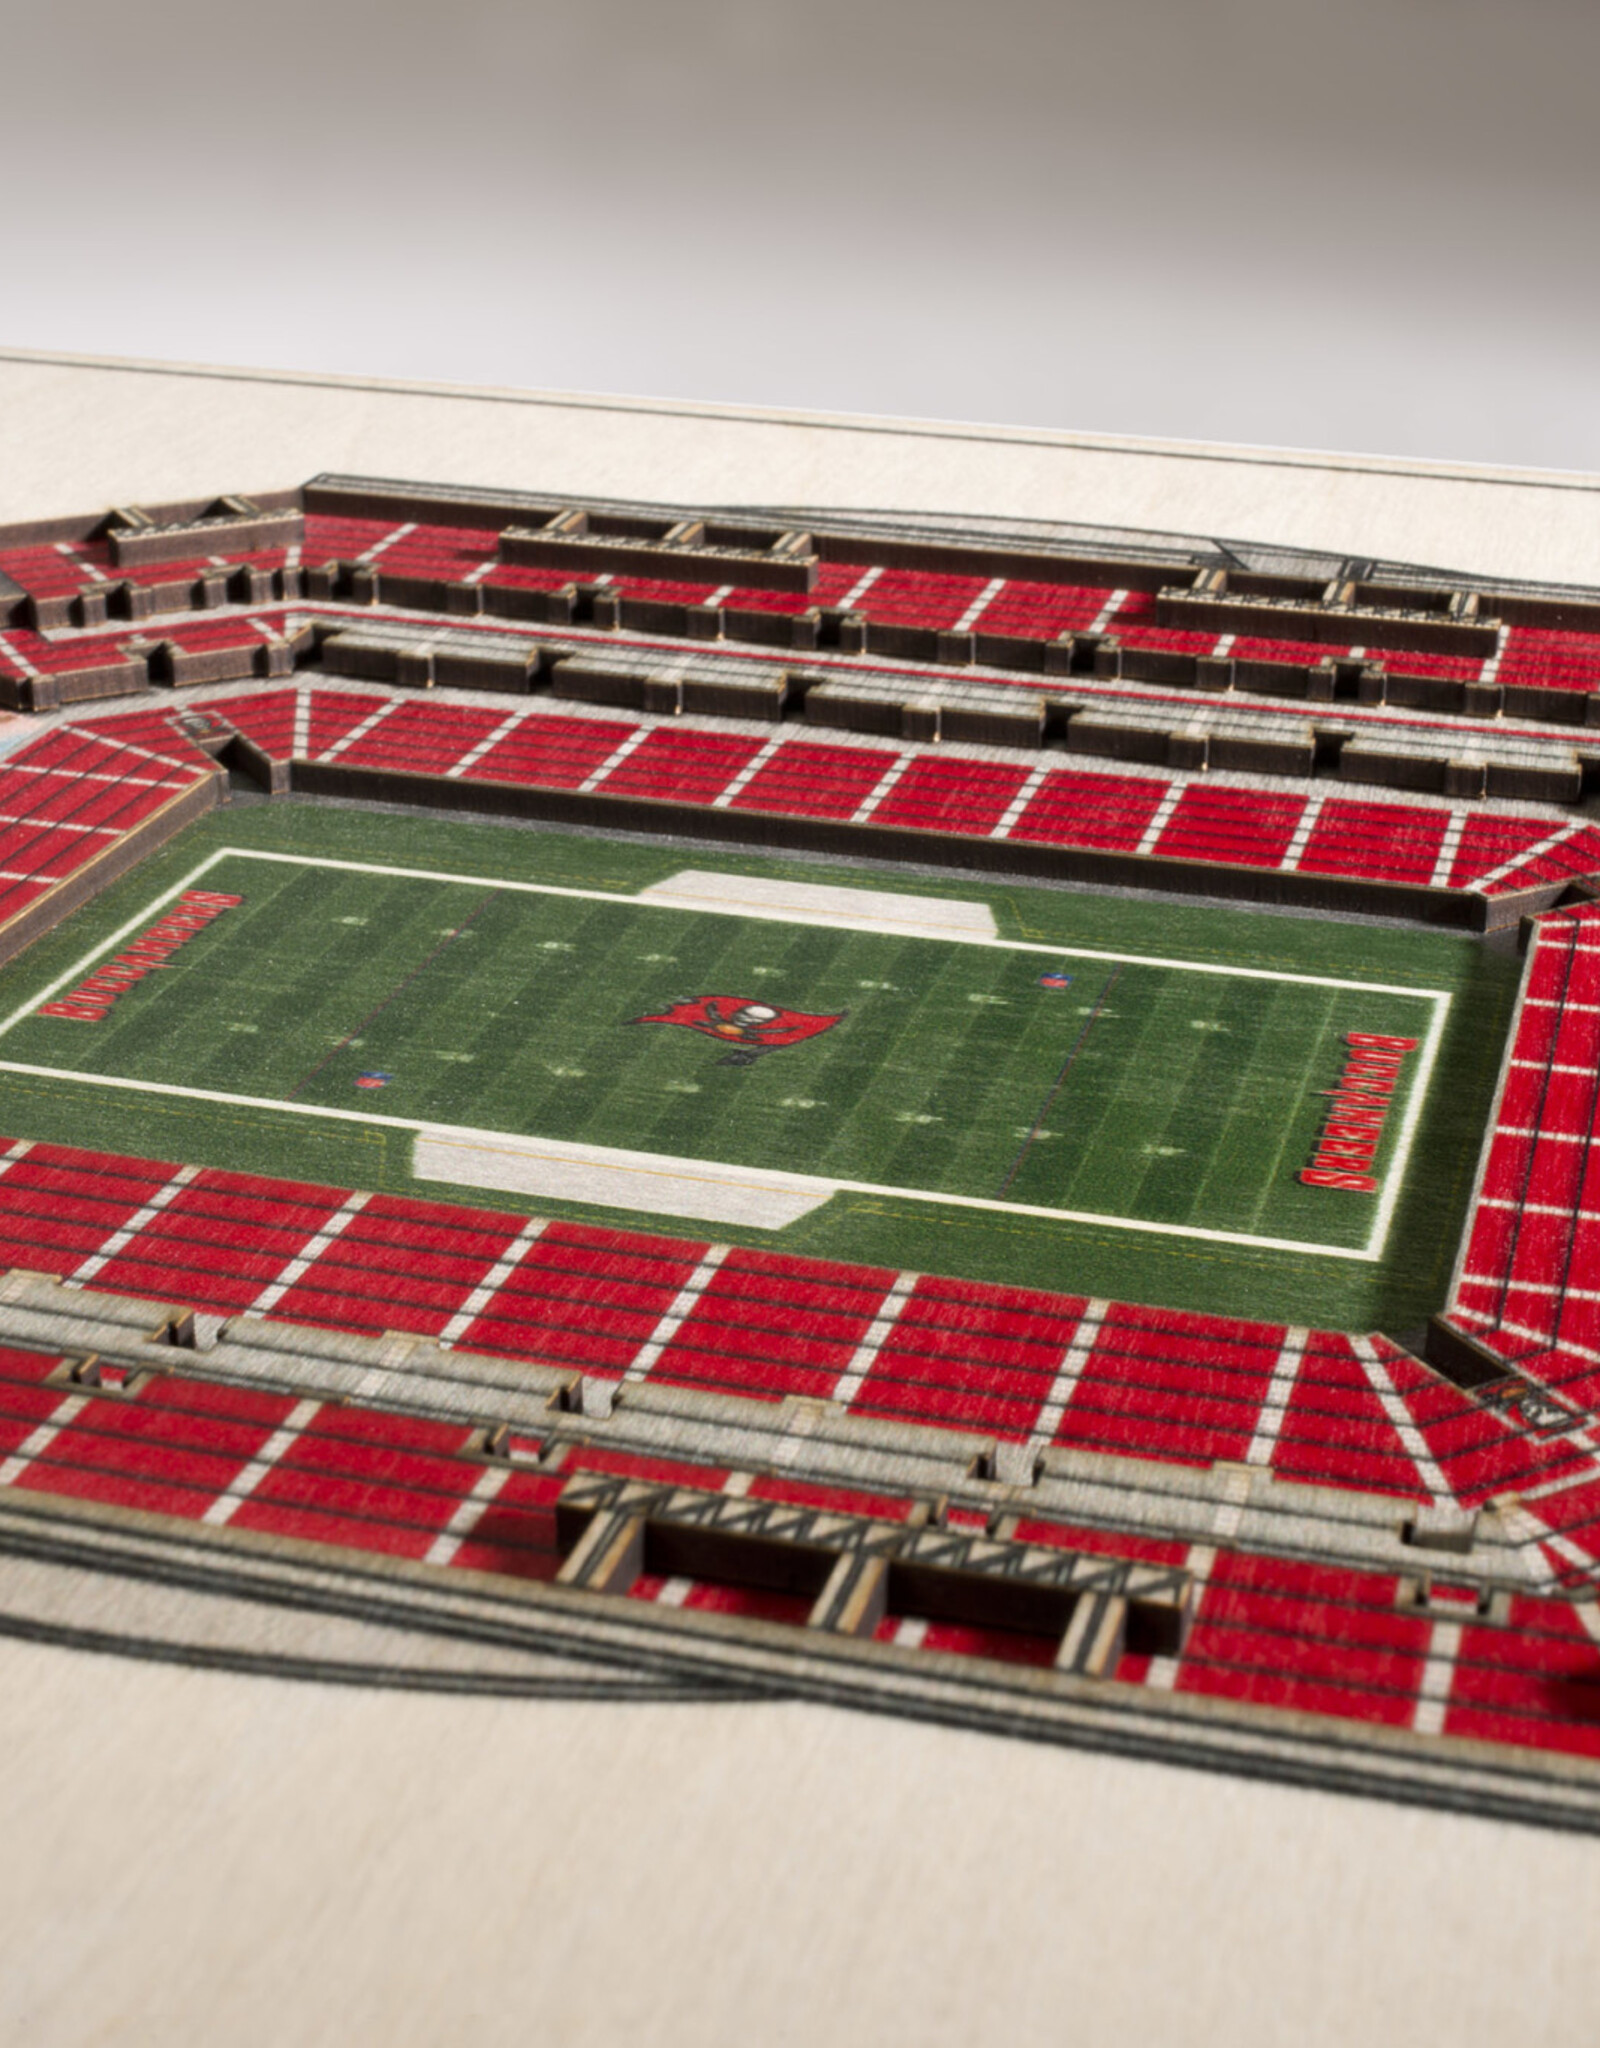 YOU THE FAN Tampa Bay Buccaneers 5-Layer 3D StadiumView Wall Art